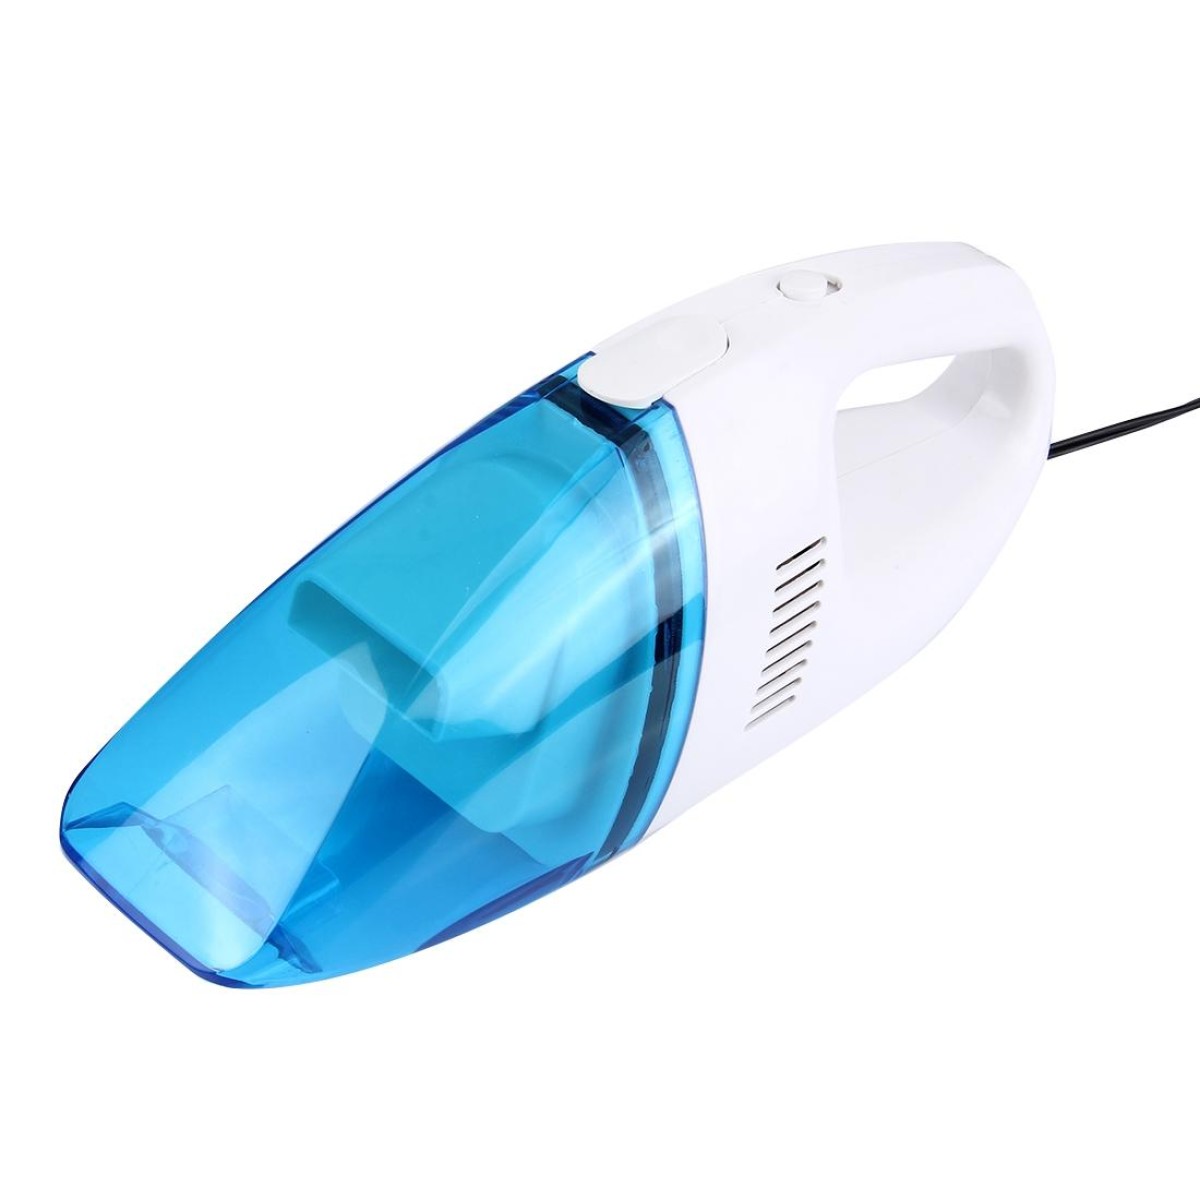 12V 60W Wet And Dry Car Vacuum Cleaner(Blue)